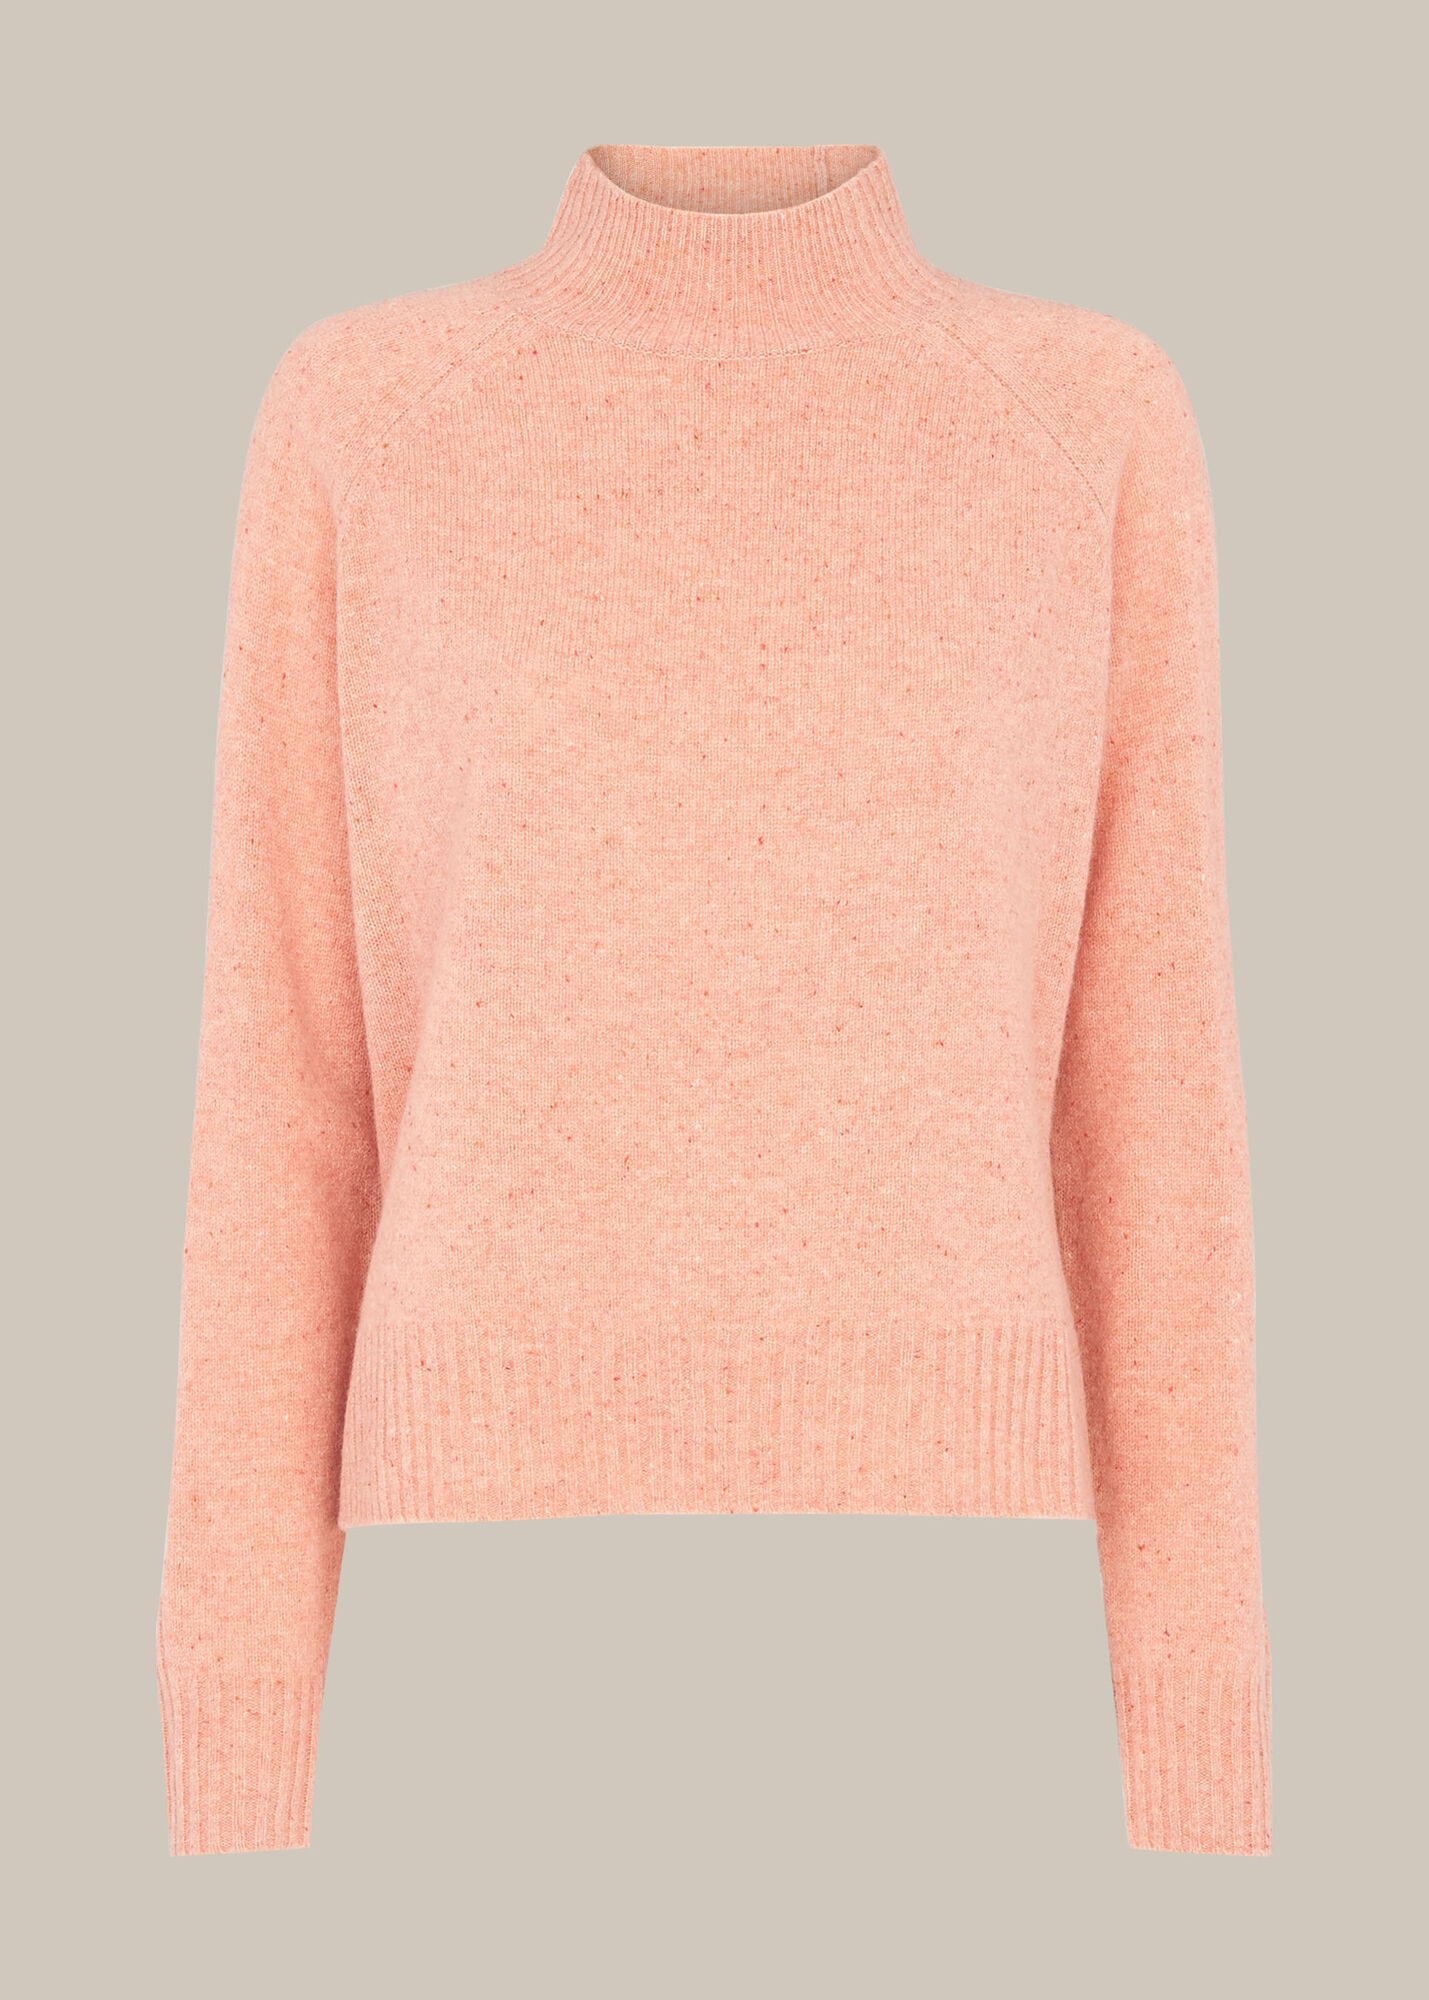 Pale Pink Funnel Neck Flecked Knit | WHISTLES